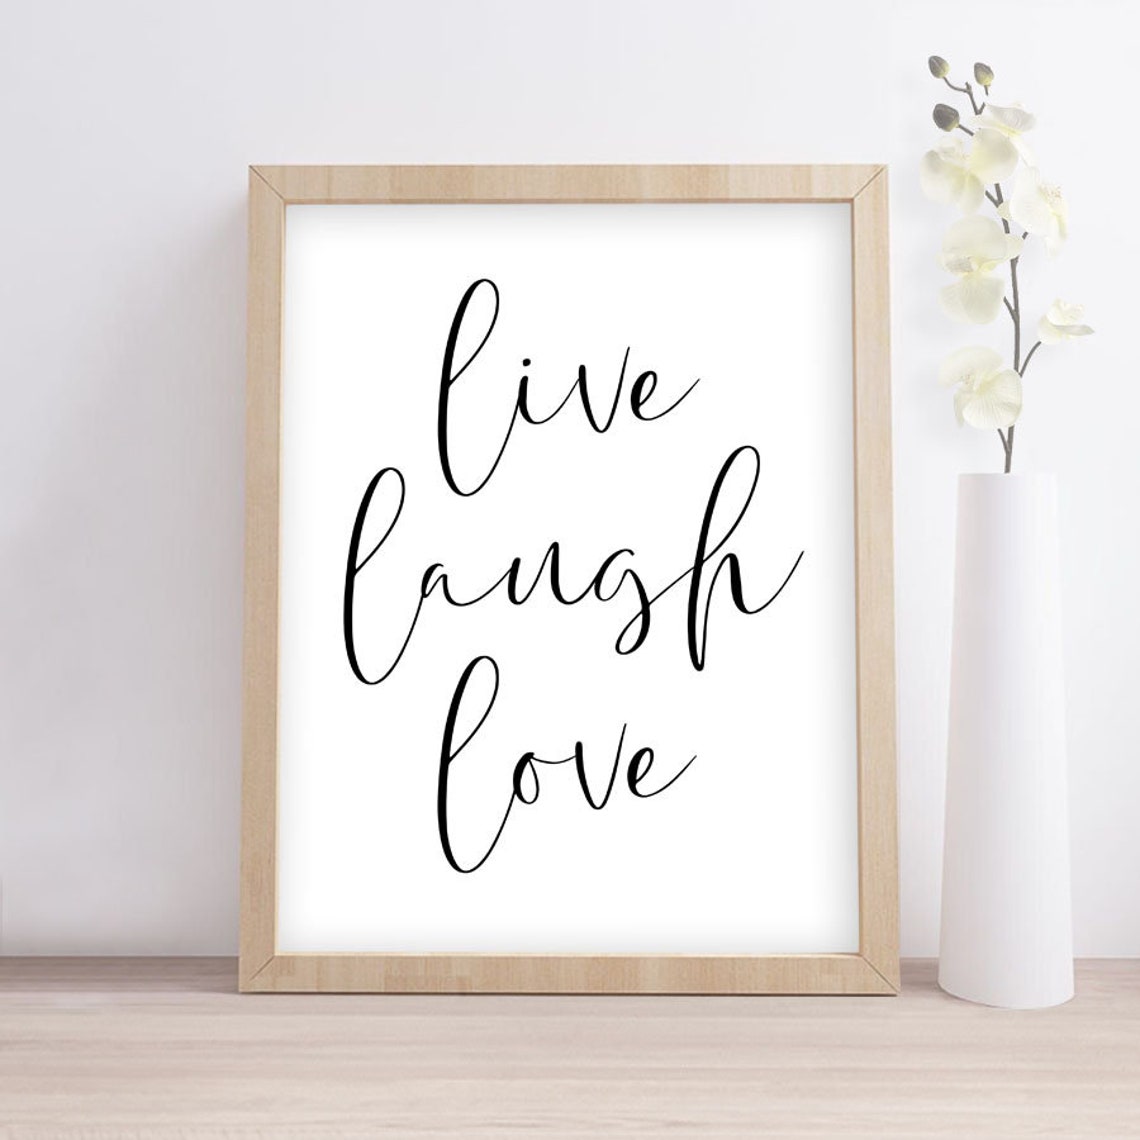 Printable Wall Art / Live Laugh Love / Instant Download Print | Etsy